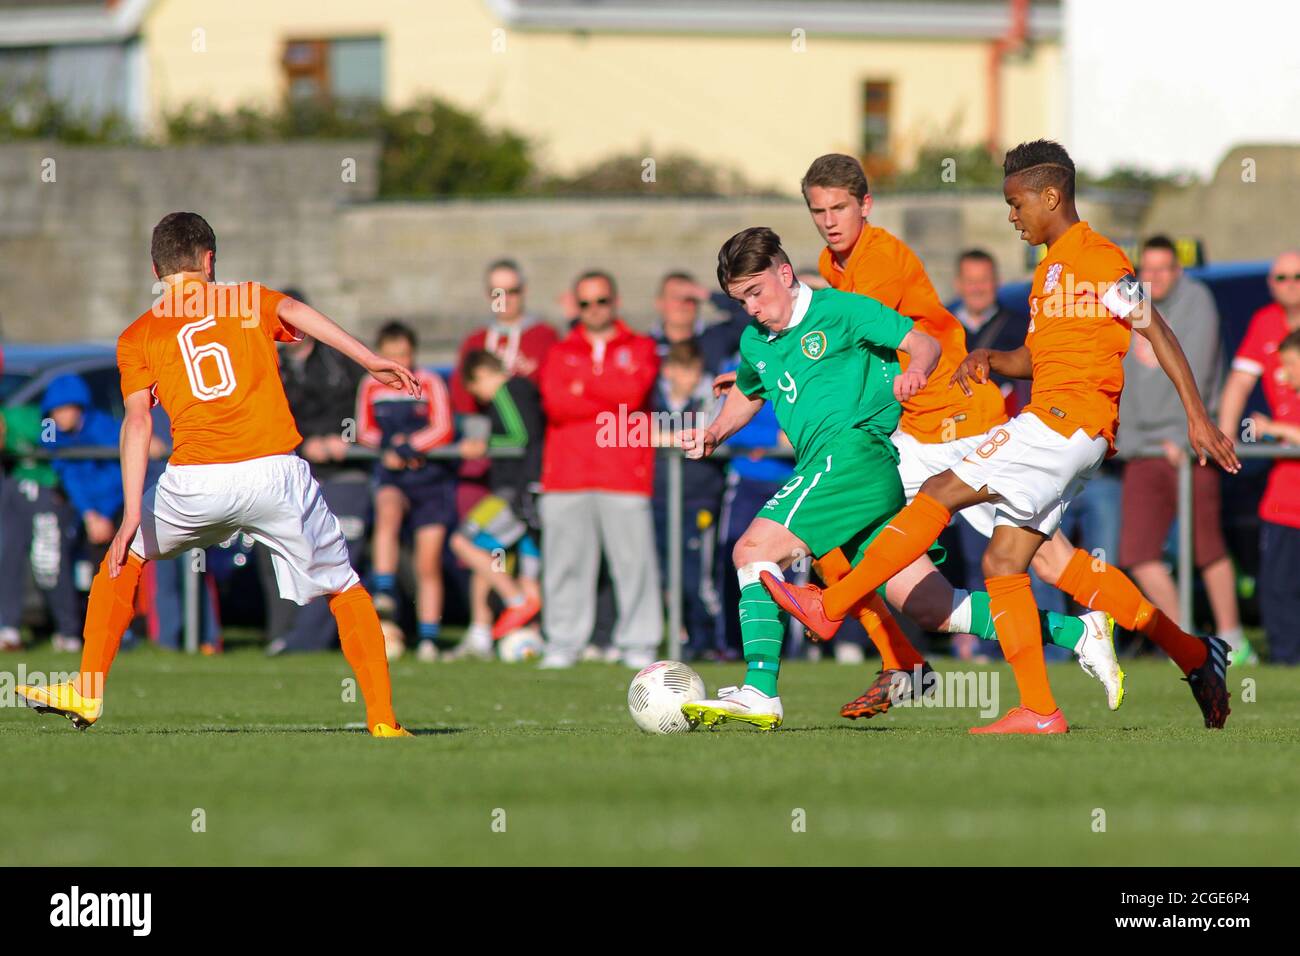 ron Connolly Of Republic Of Ireland U15 In Action Against The Netherlands Republic Of Ireland V Netherlands U15 International Friendly 14 4 15 Pearse Stadium Janesboro Fc Limerick Pictures Of A Young ron Connolly Currently